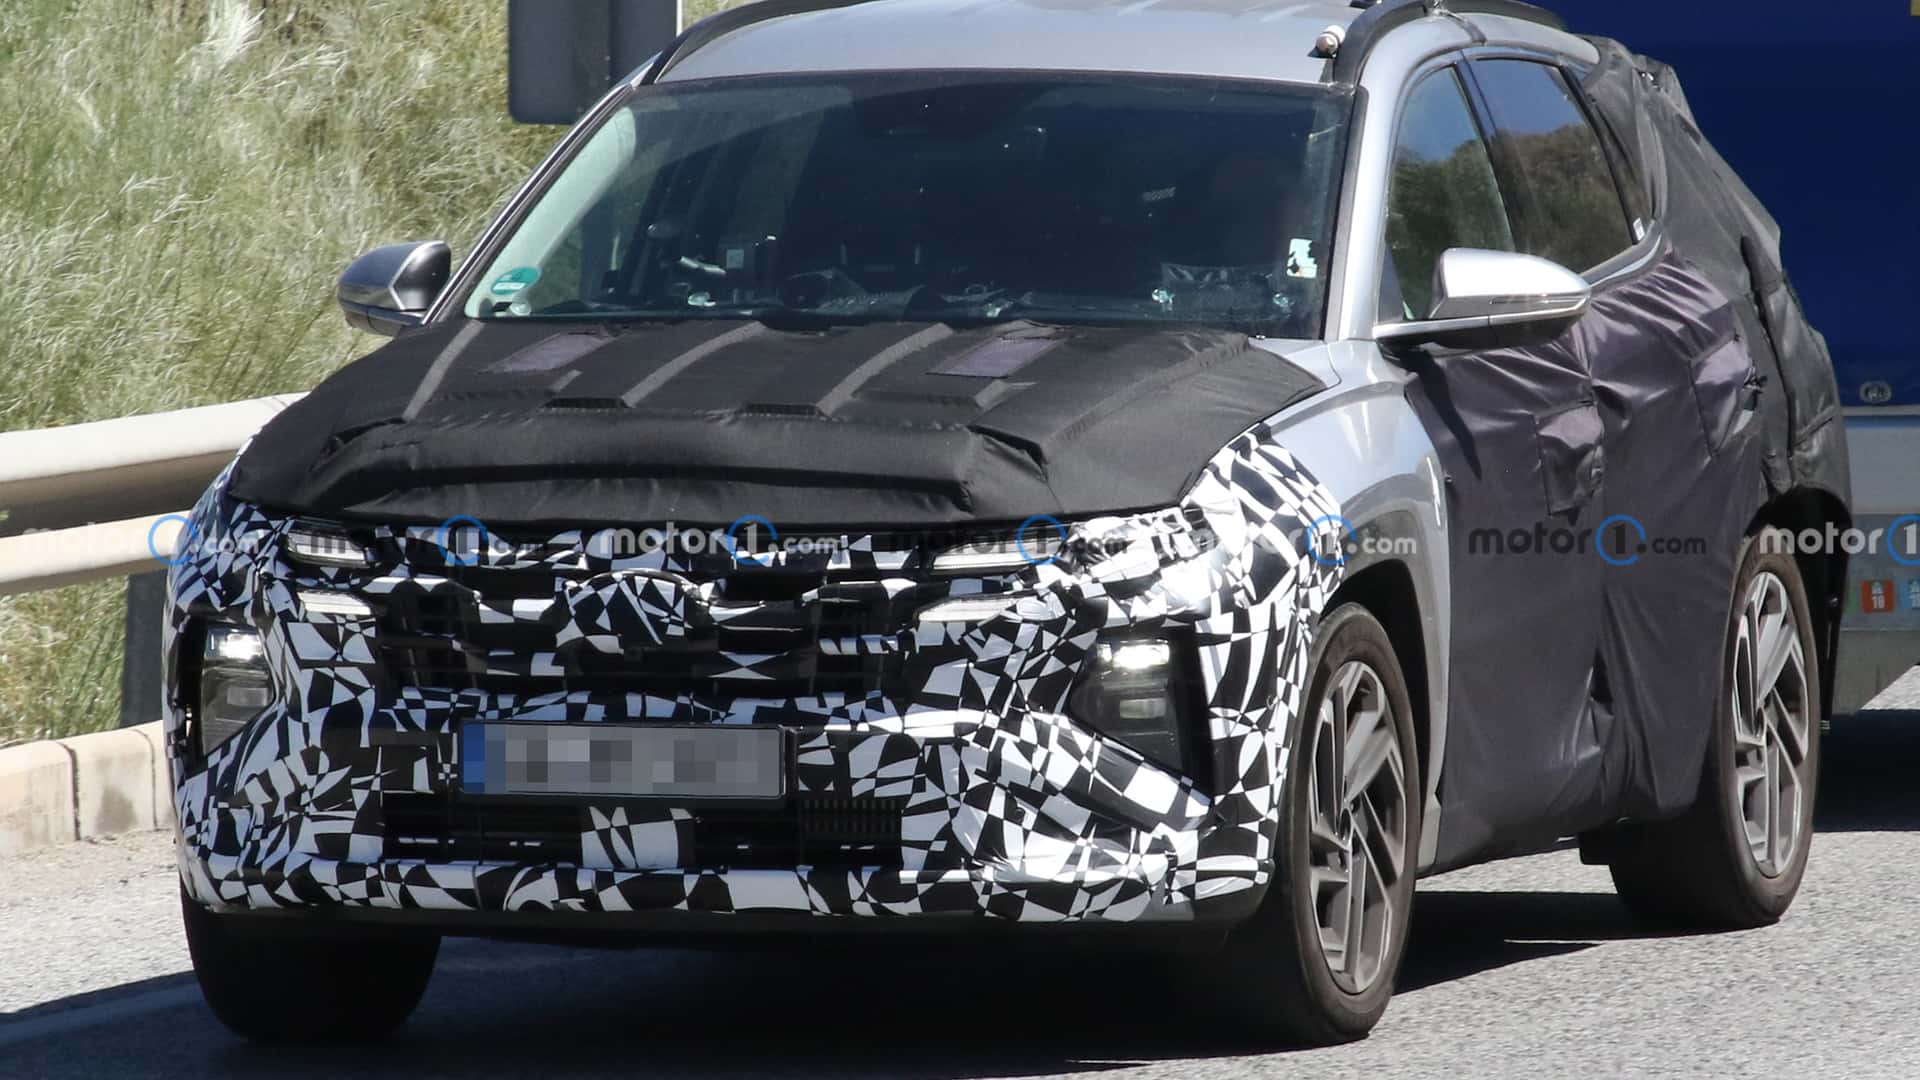 Hyundai Tucson Facelift spotted on test drive, promising to be launched soon hyundai-tucson-facelift-front-view-spy-photo.jpg